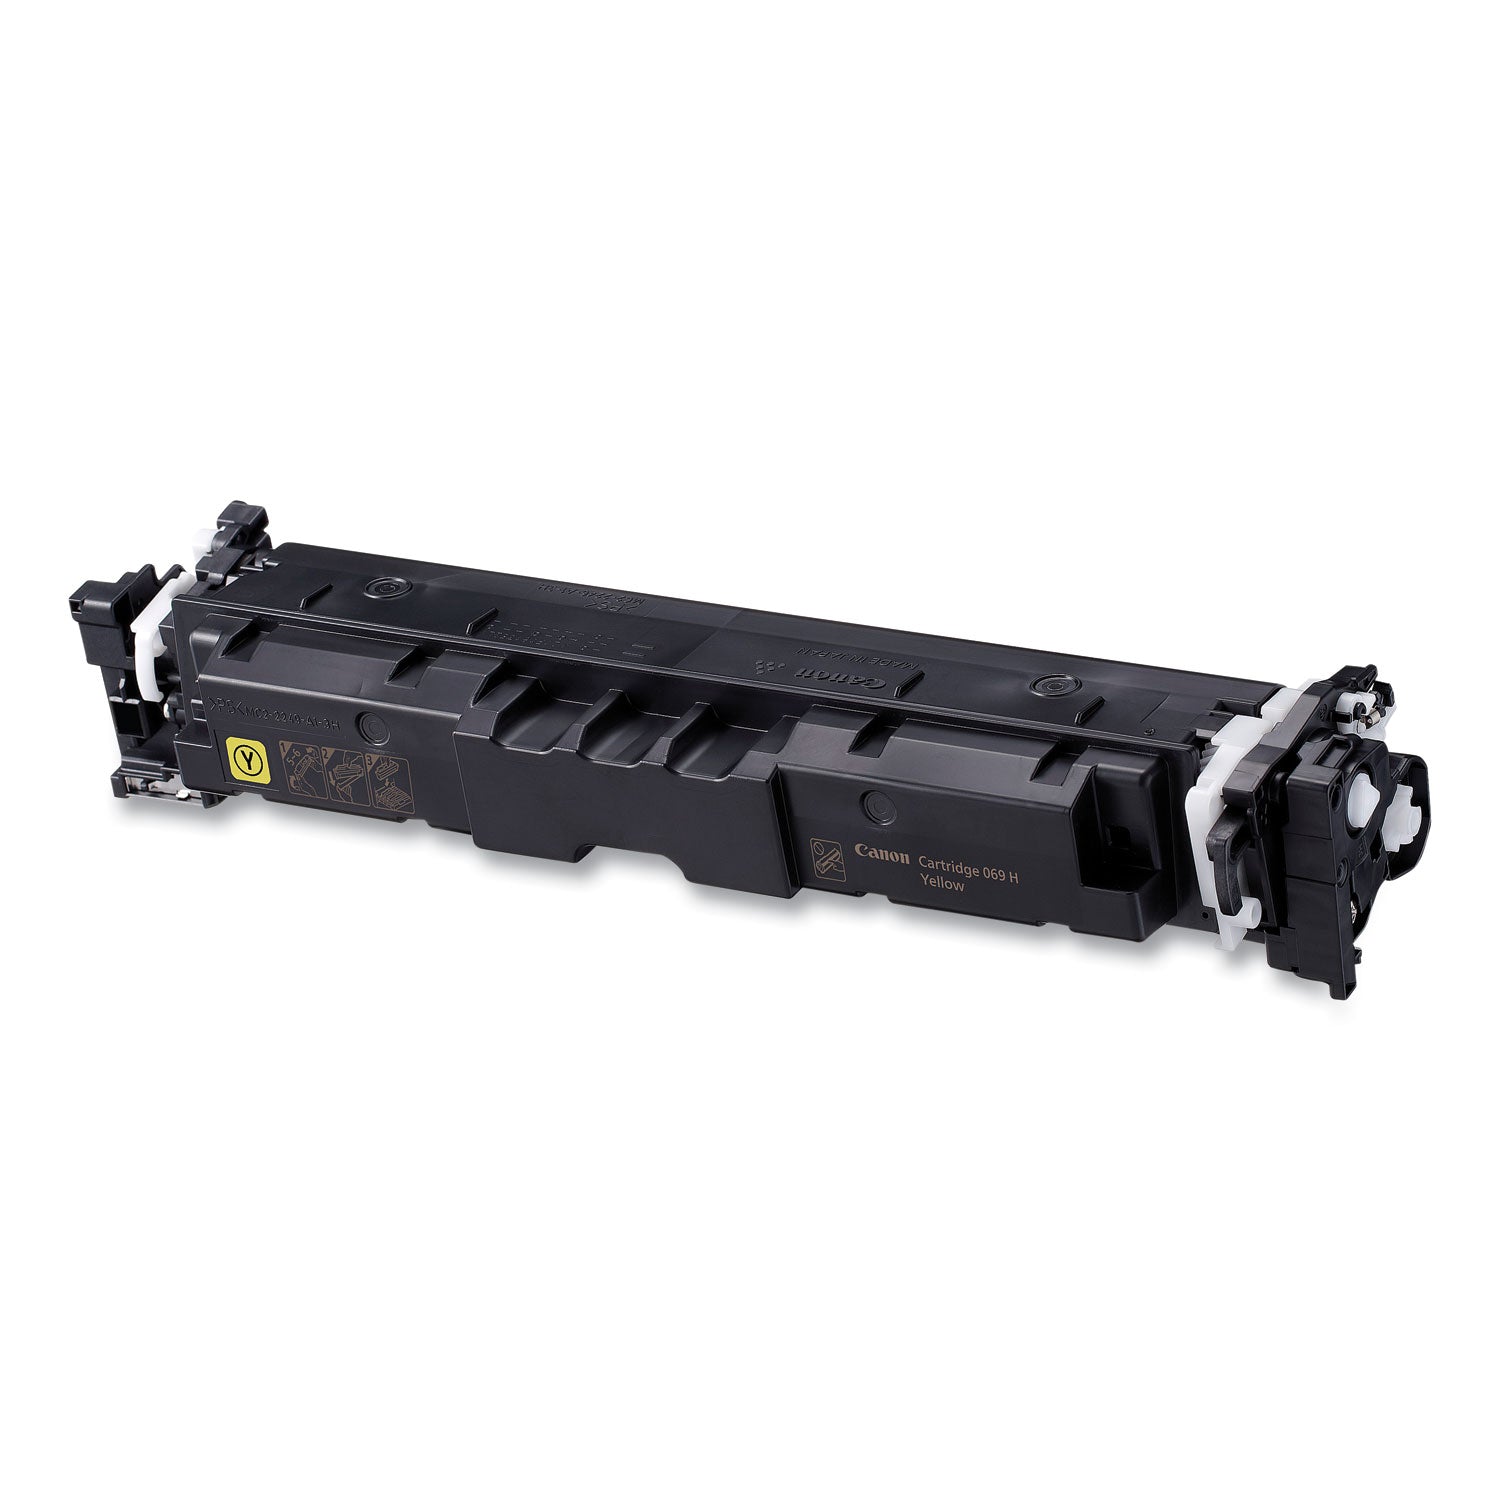 5095c001-069h-high-yield-toner-5500-page-yield-yellow_cnm5095c001 - 3